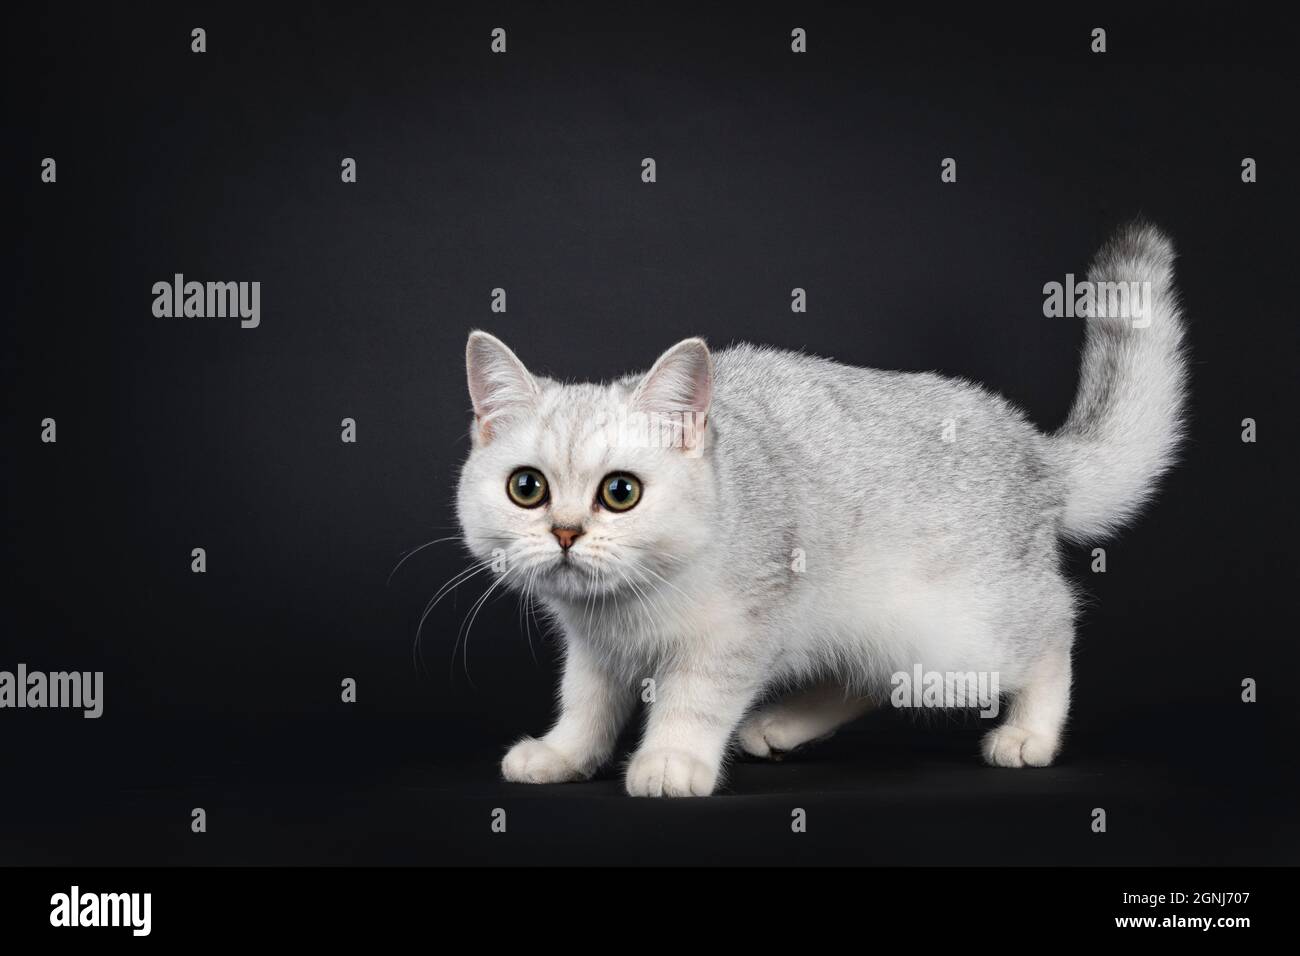 Cute silver shaded British Shorthair cat kitten, standing side ways head  down. Looking towards camera. Isolated on a black background Stock Photo -  Alamy